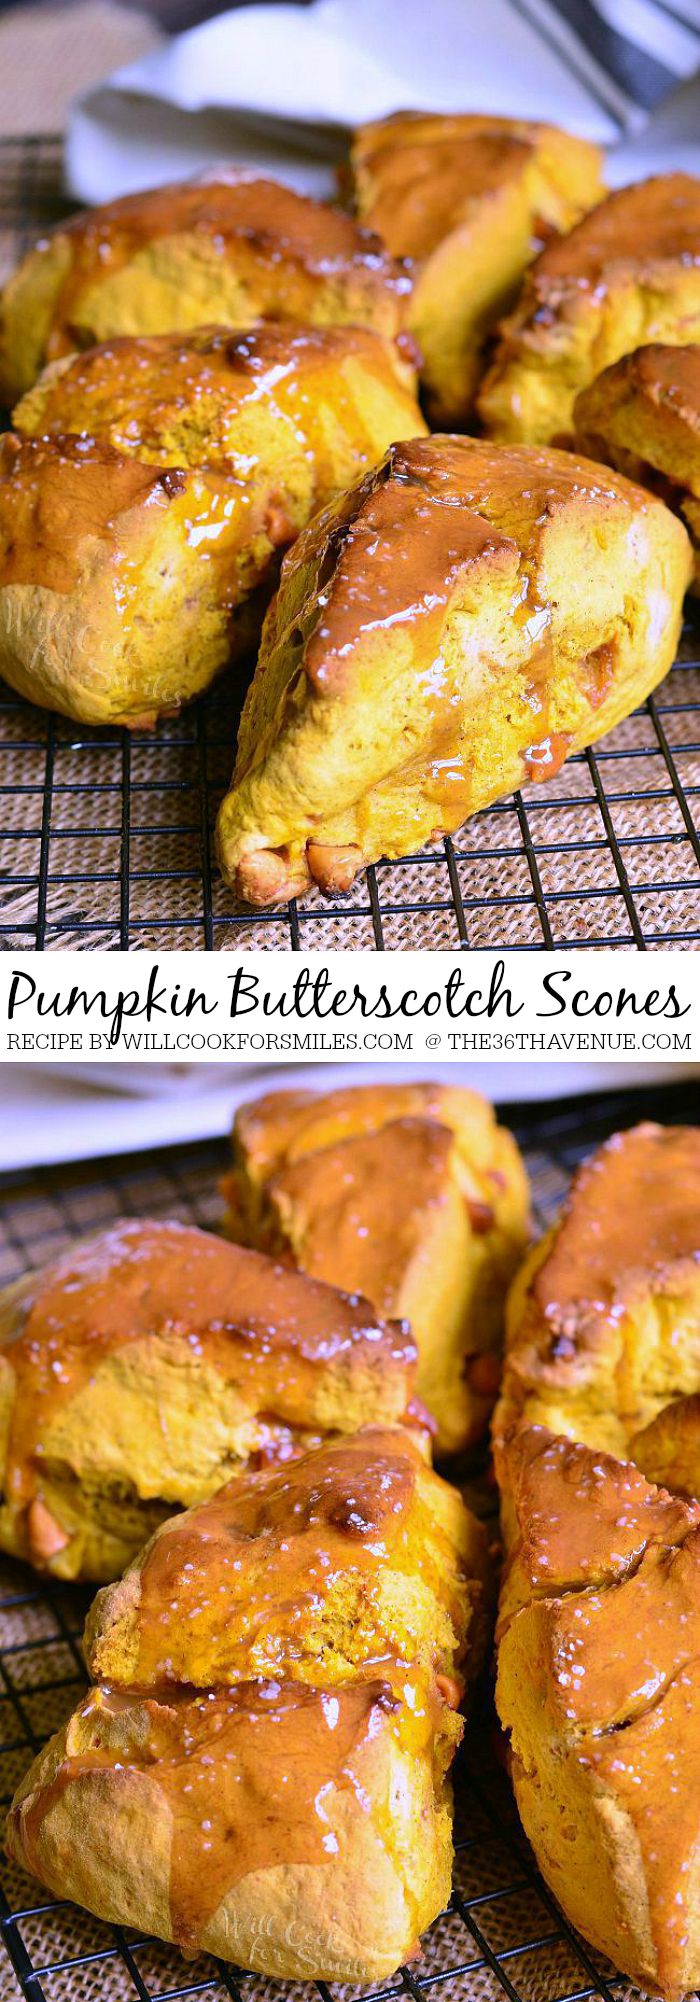 Recipes - Scrumptious warm pumpkin scones made with butterscotch chips inside and topped with gooey caramel and salt.